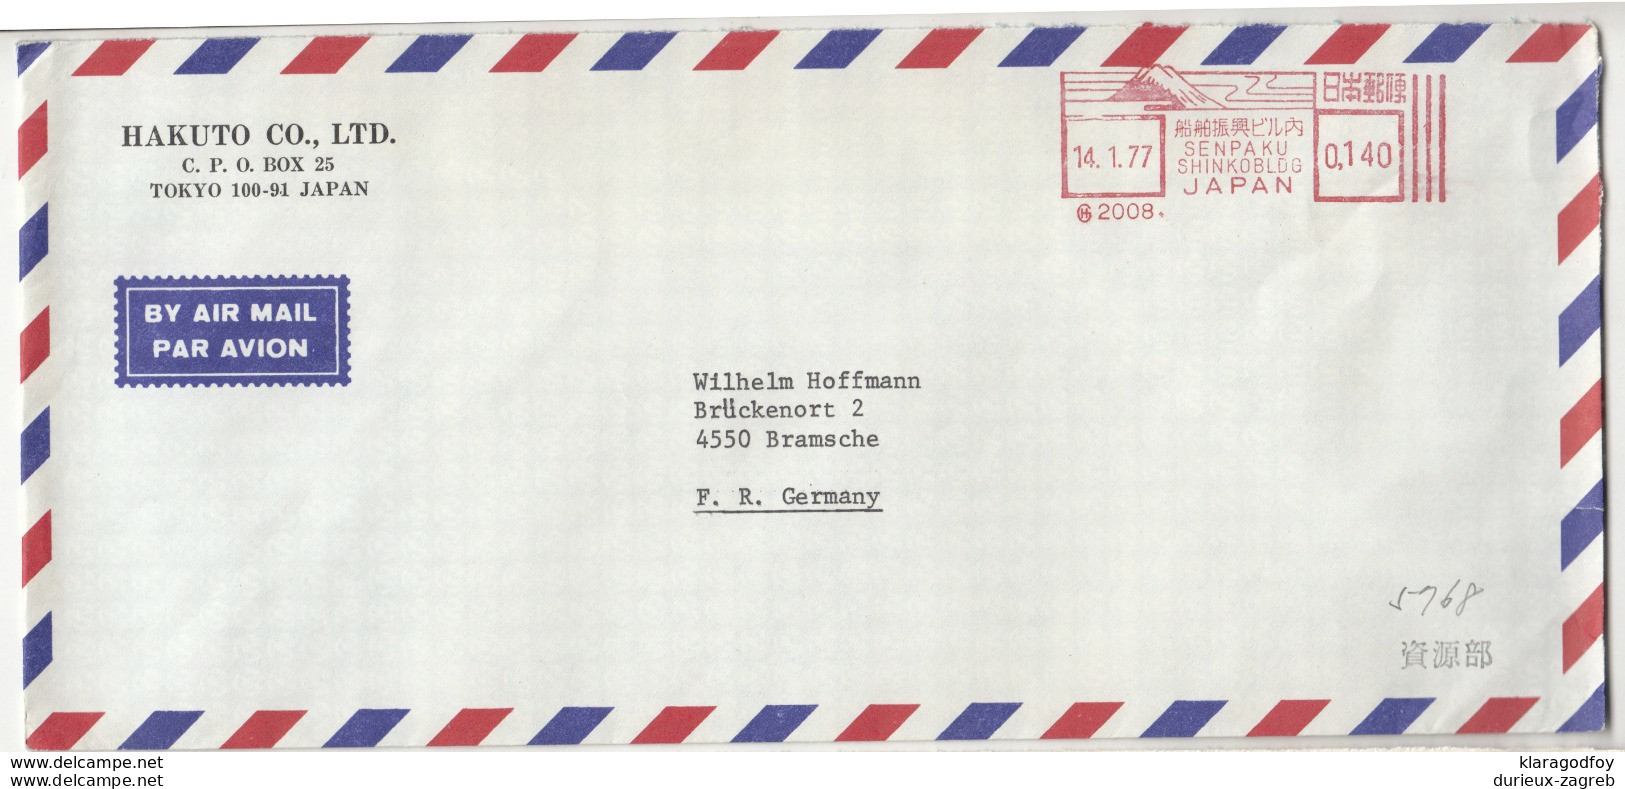 Hakuto Co., Tokyo Company Air Mail Letter Cover Travelled 1977 To Germany - Senpaku Shinkoblog Meter Stamp B190922 - Covers & Documents